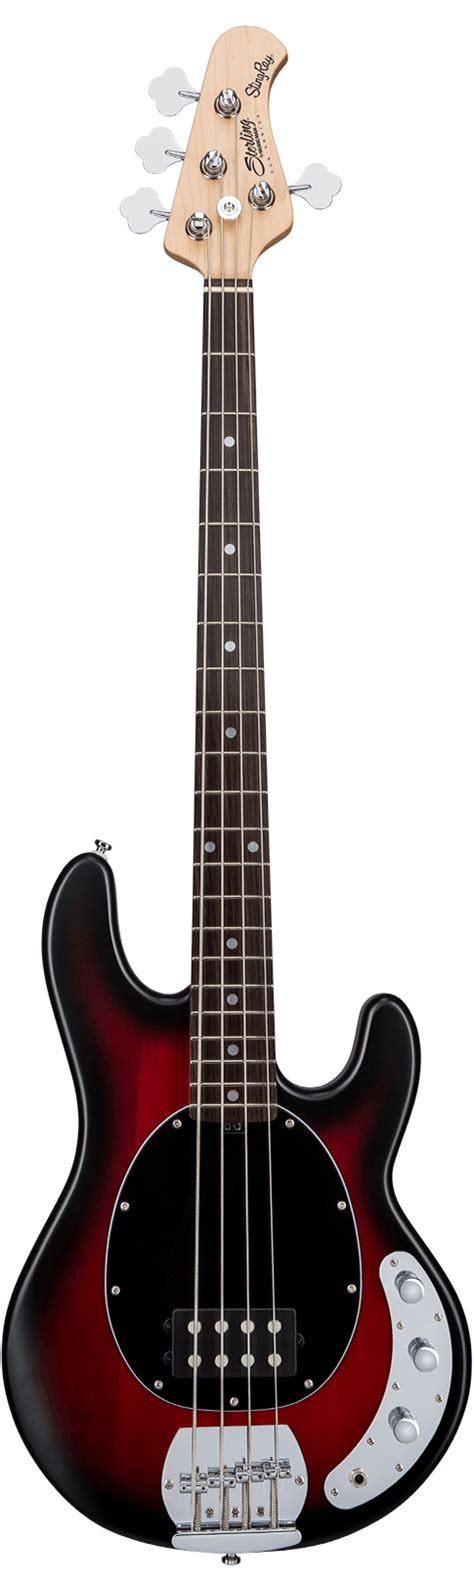 Sterling By Music Man Stingray Ray4 Bass In Ruby Red Burst Satin